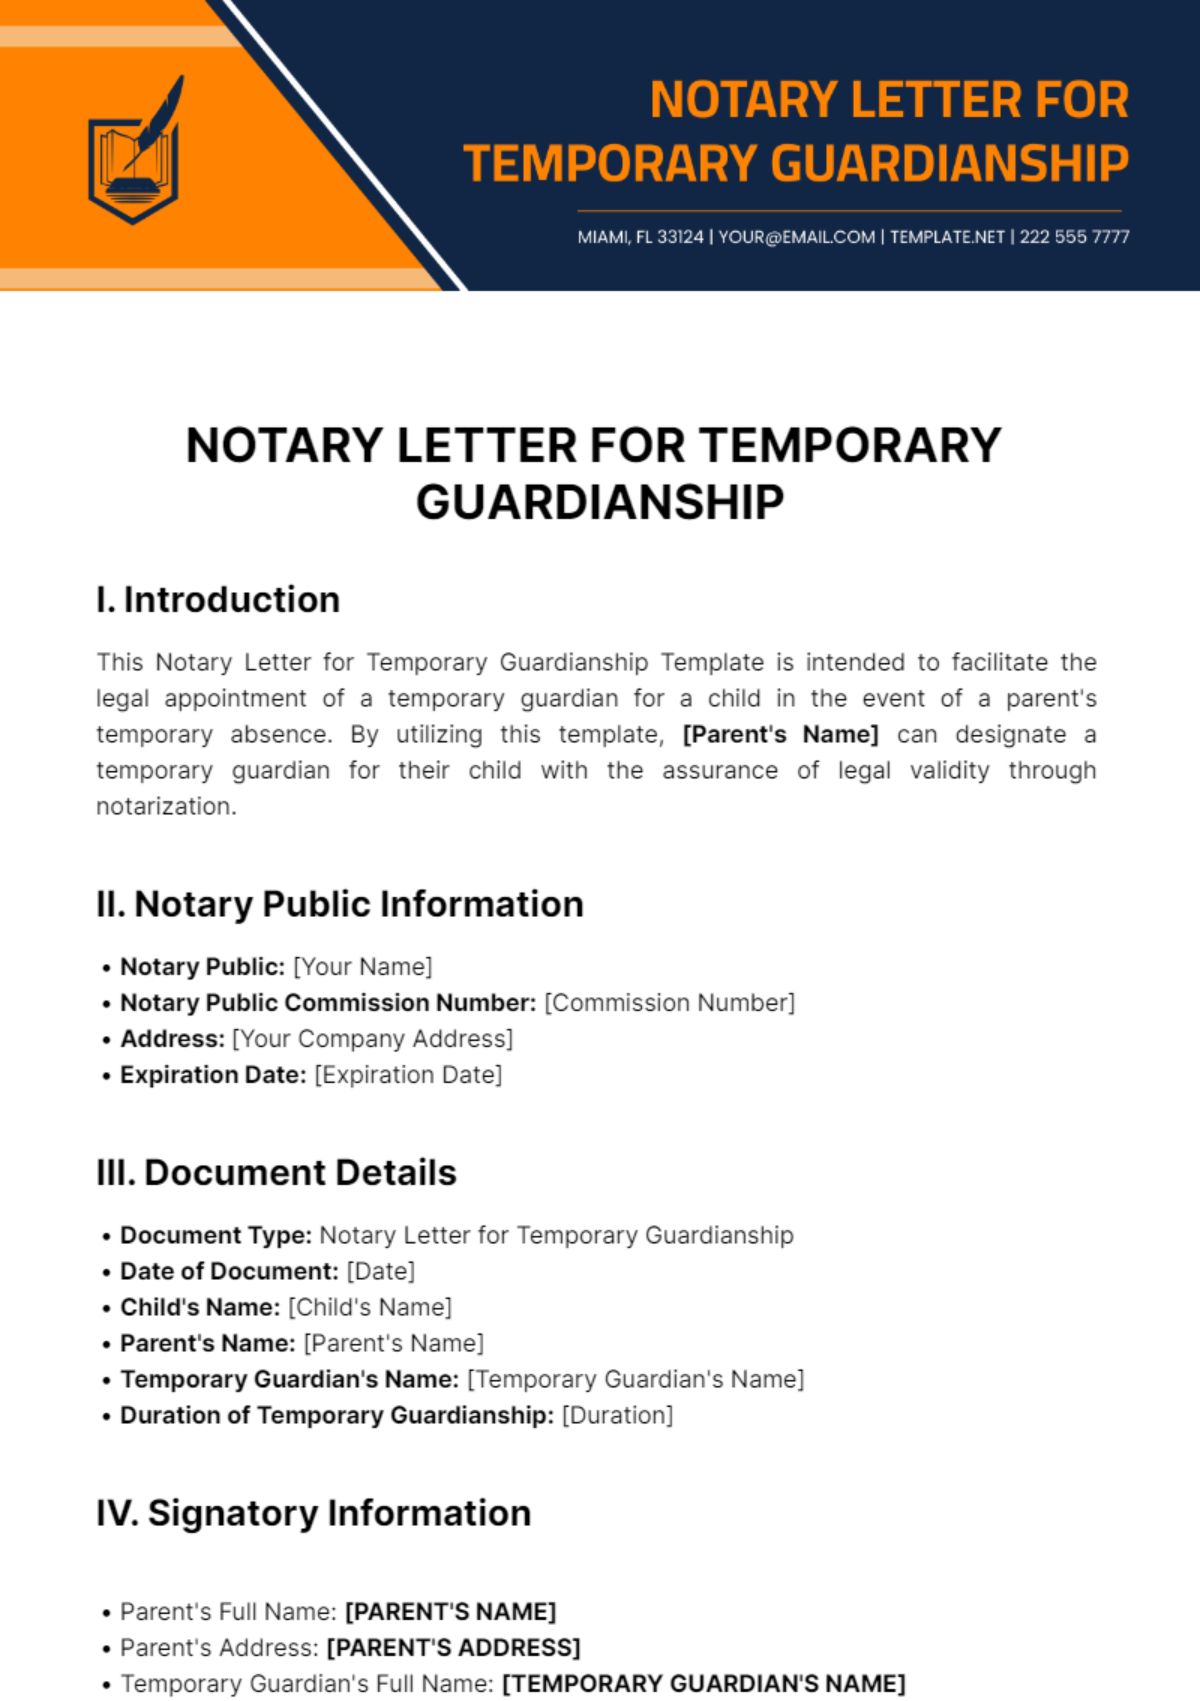 Notary Letter for Temporary Guardianship Template